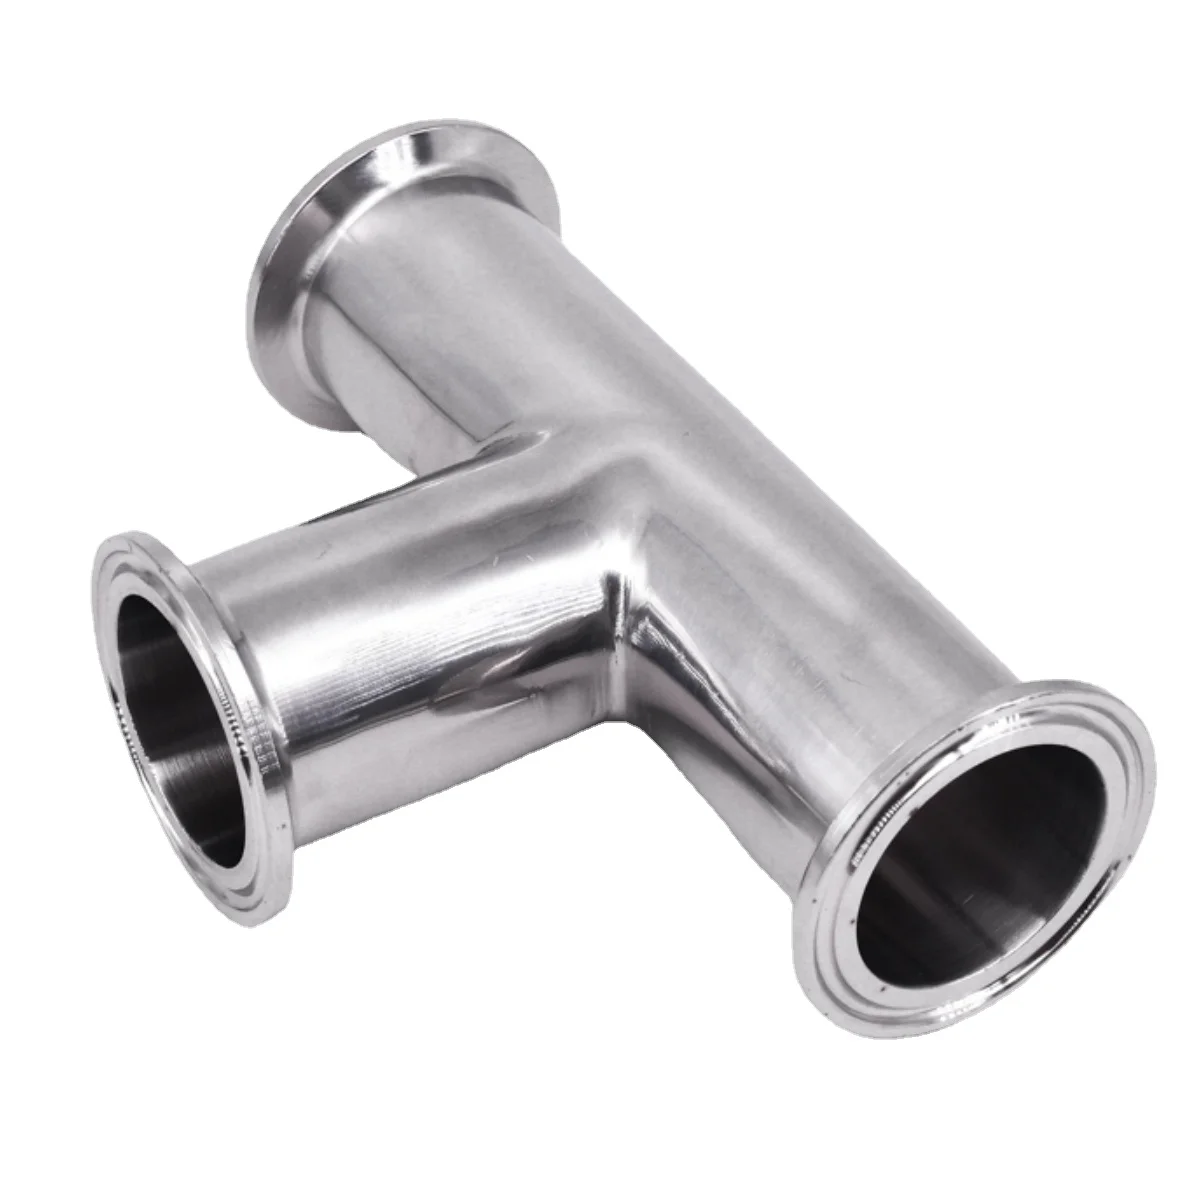 12.7/19/25/32/38/45/51mm Pipe OD 0.5" 1.5" 2" Tri Clamp Tee 3 Way Connector Sanitary Pipe Fitting SUS304/316 Stainless Homebrew